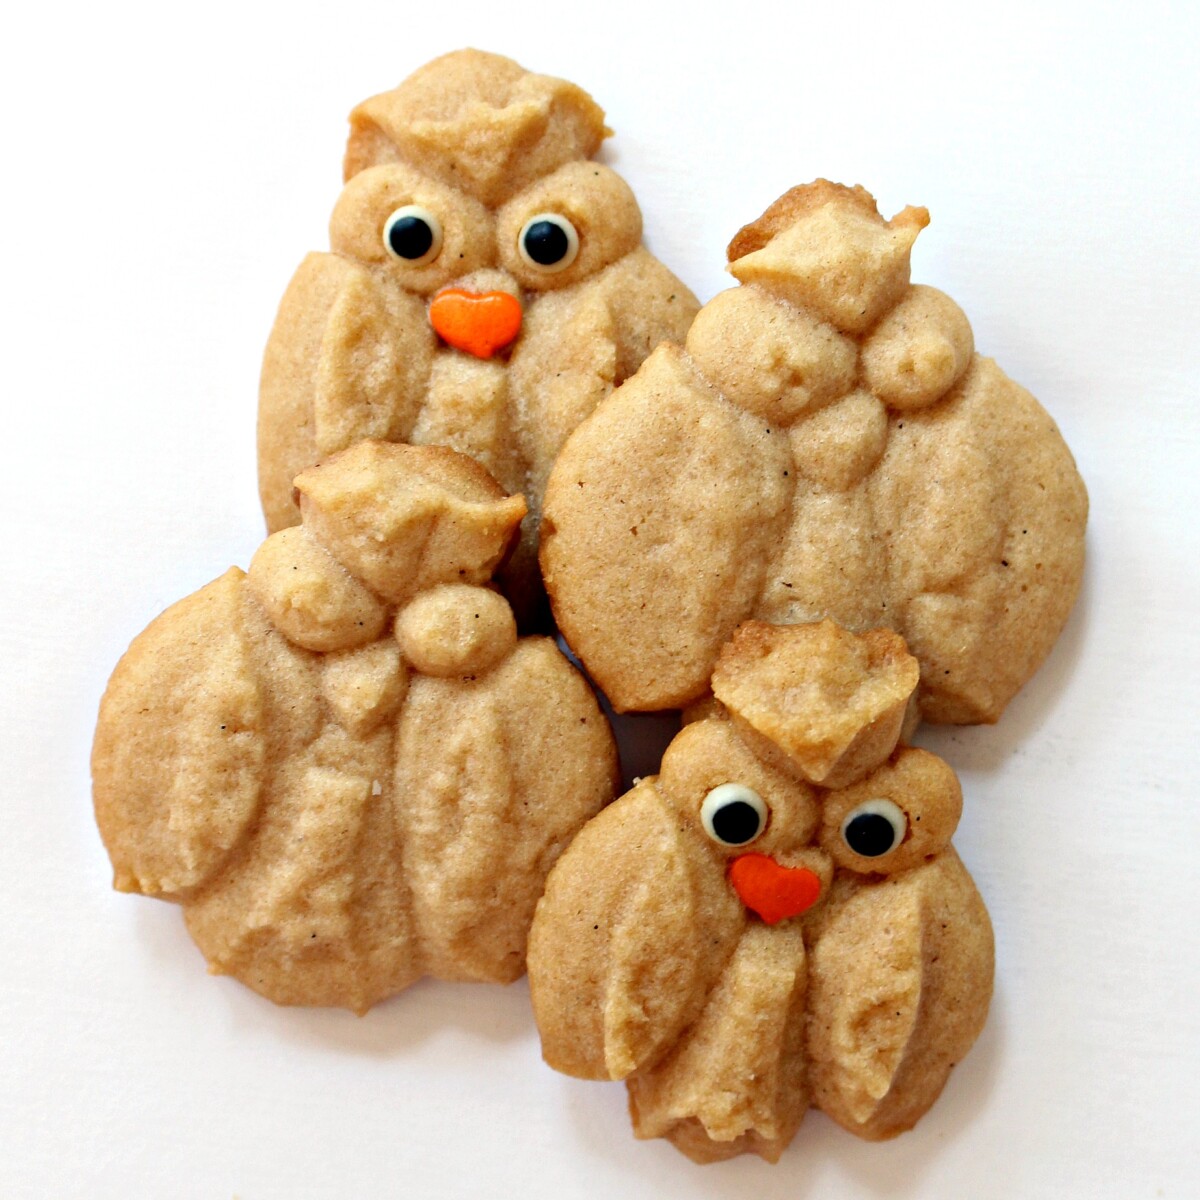 Cinnamon Spritz Owl Cookies plain and with candy eyes and sprinkle beak.